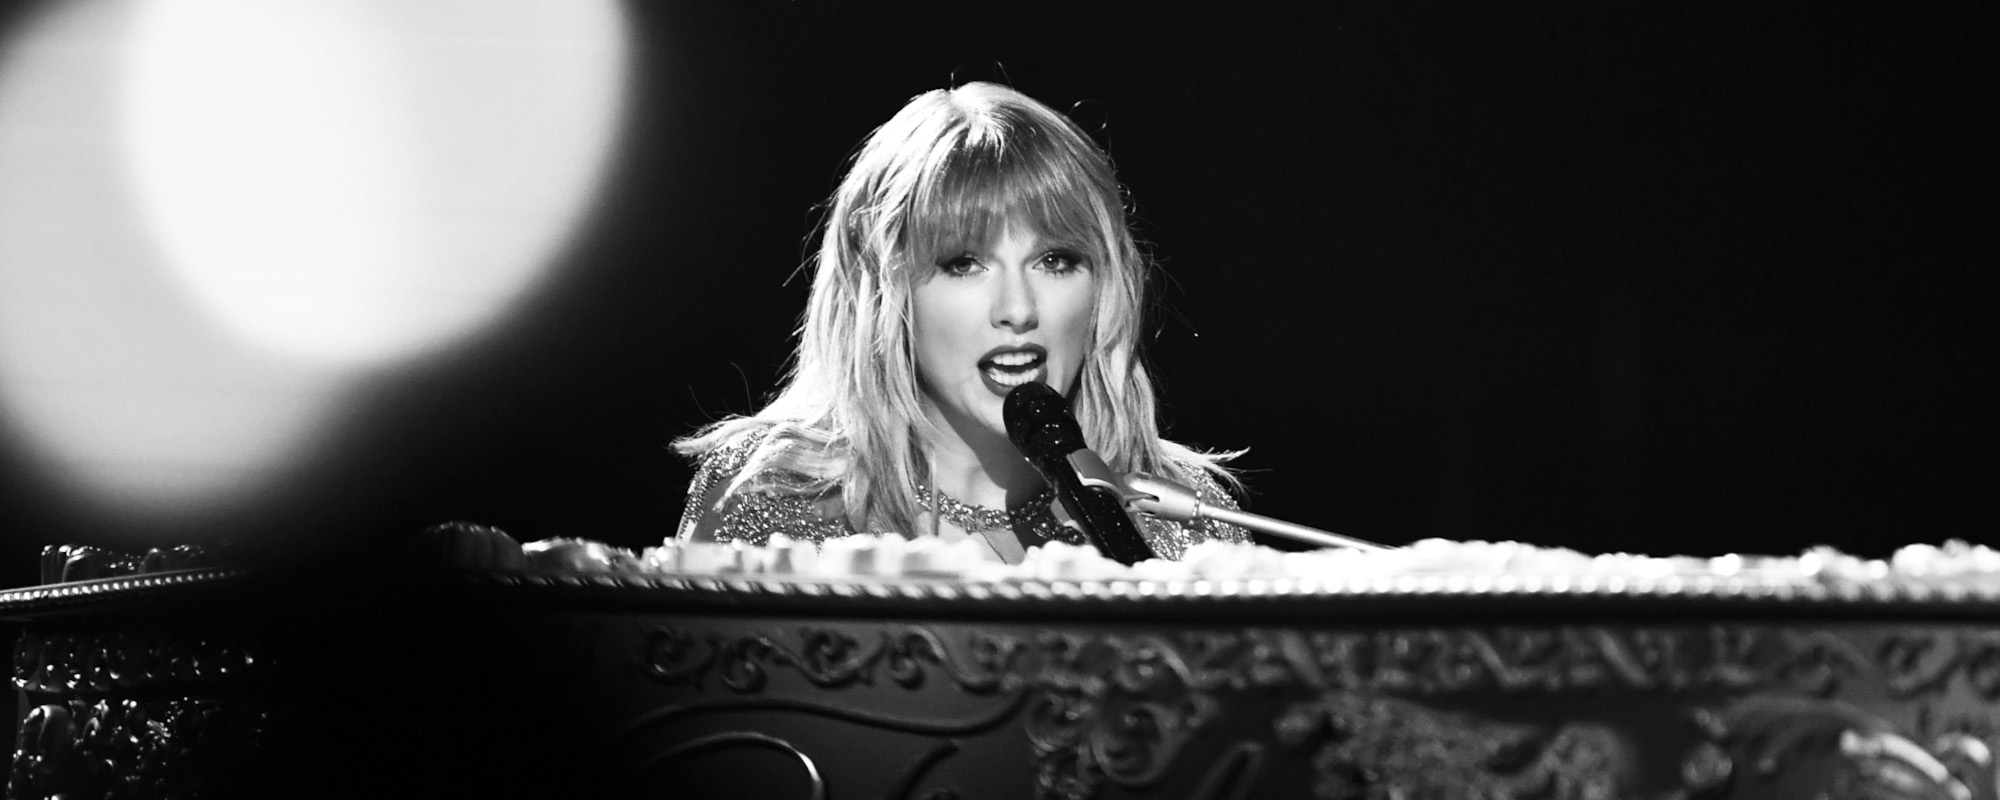 Watch: Taylor Swift and The National Release “The Alcott”